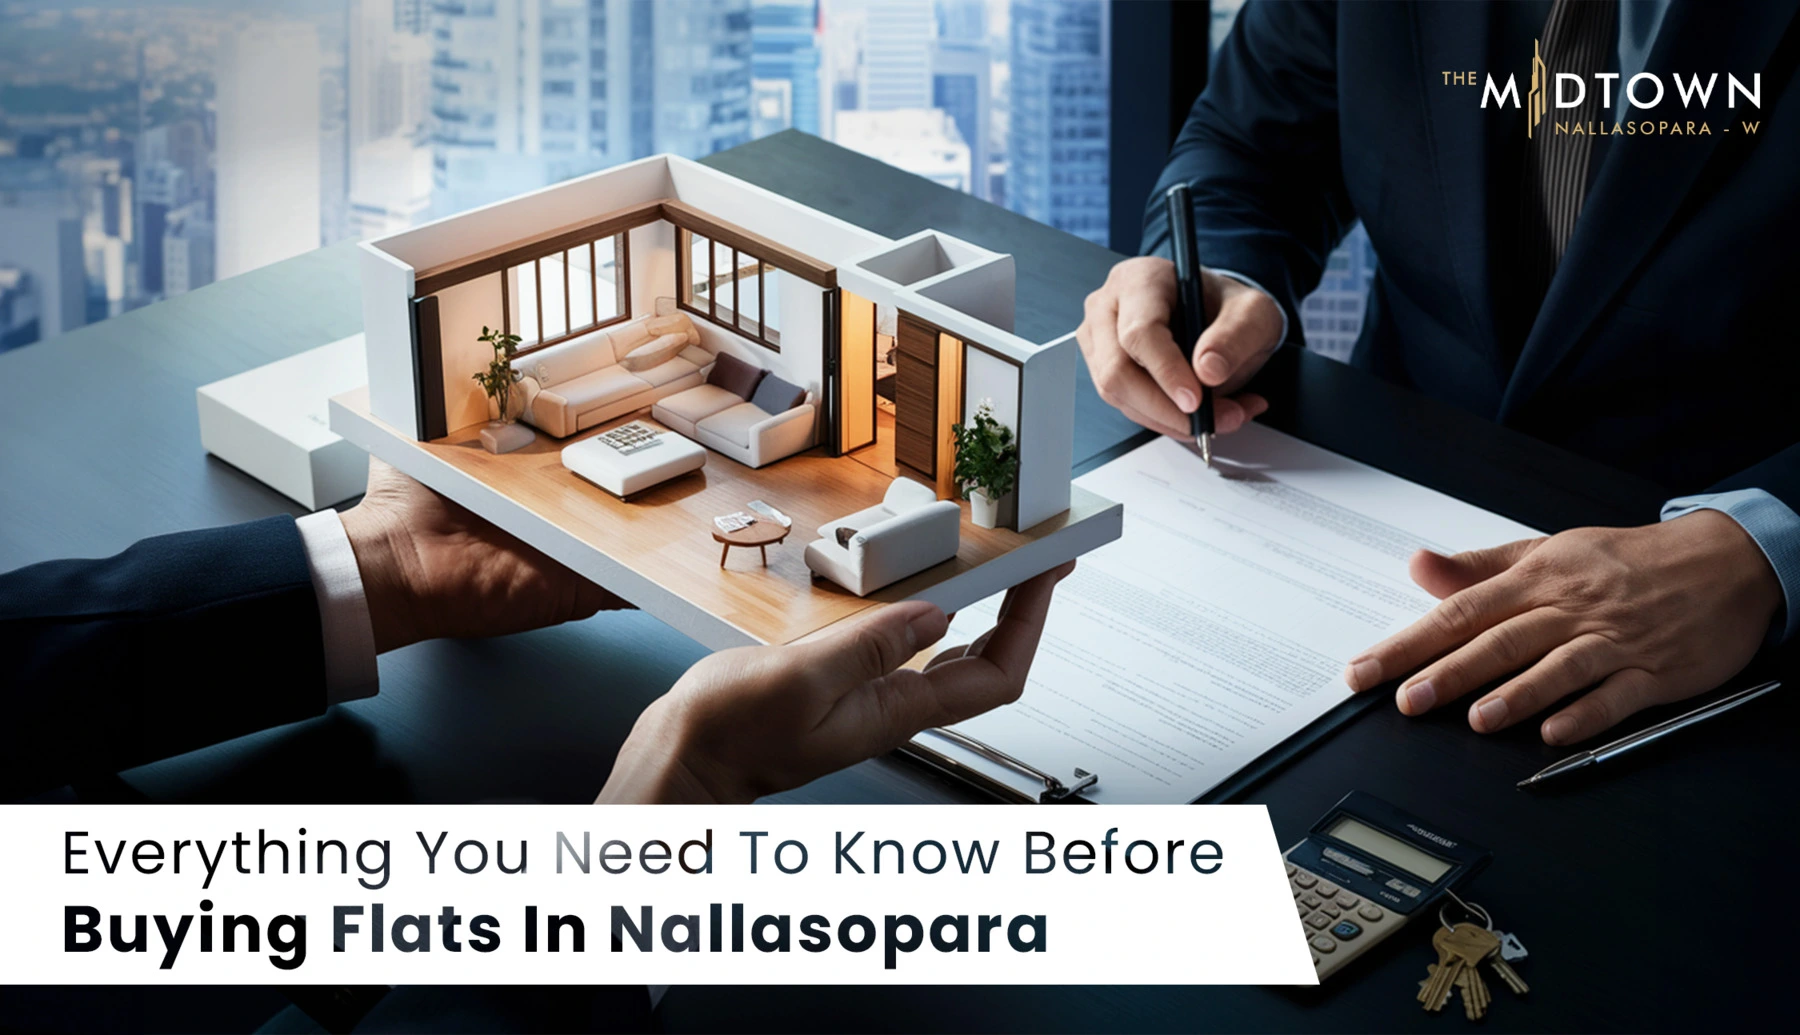 Everything You Need To Know Before Buying Flats In Nallasopara